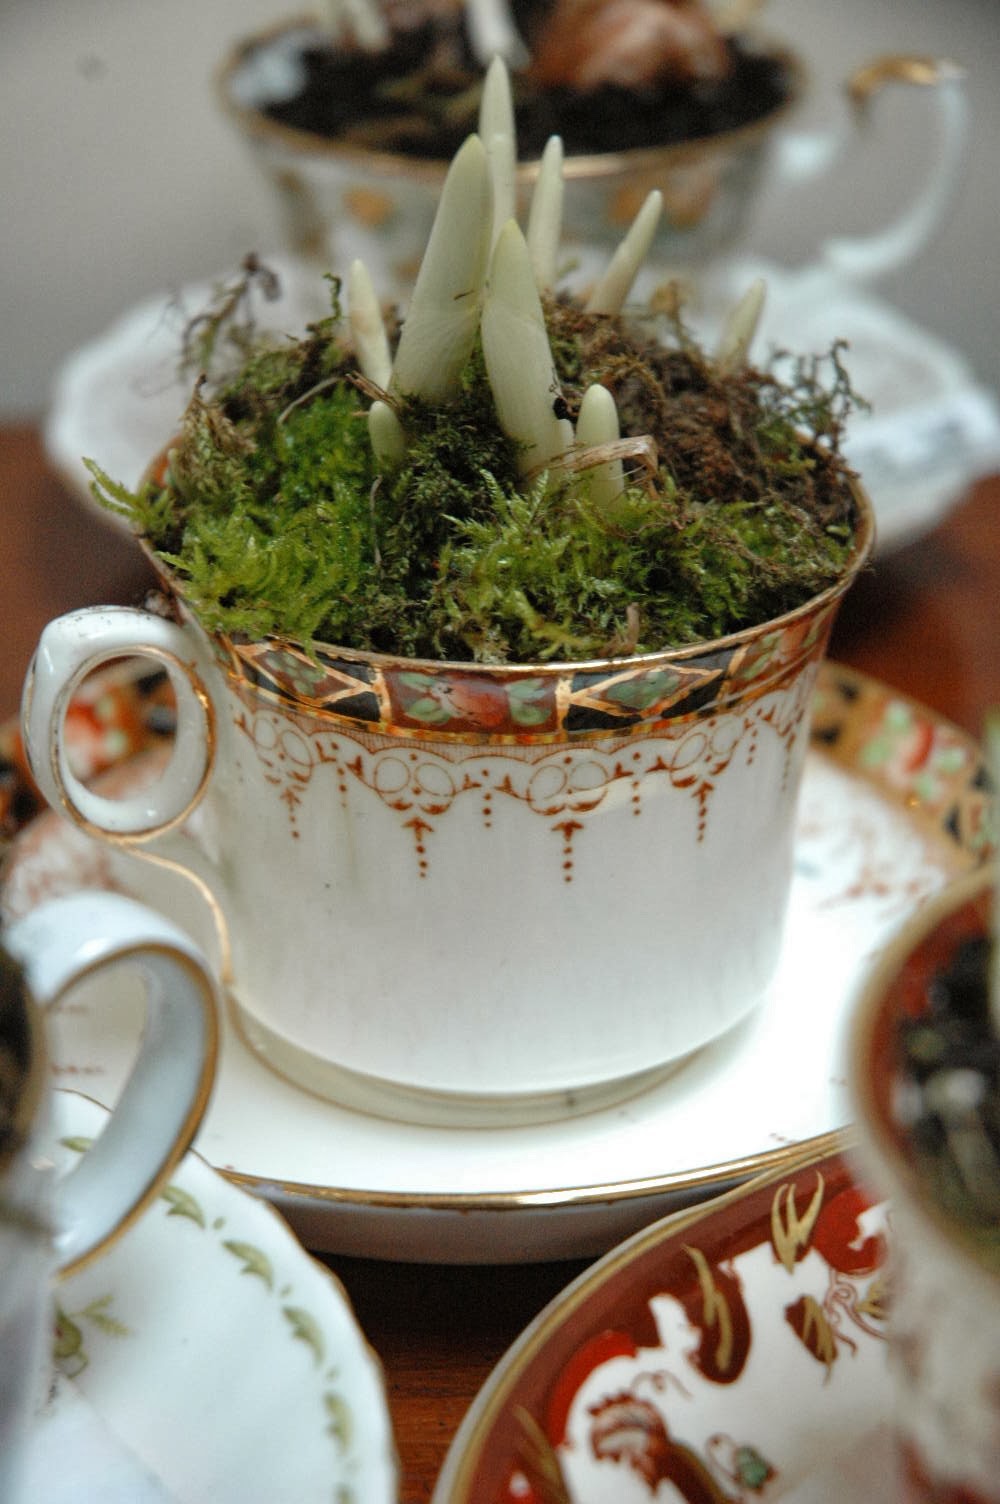 An old imari teacup is now a planter for purple 'Flower Record' crocuses.